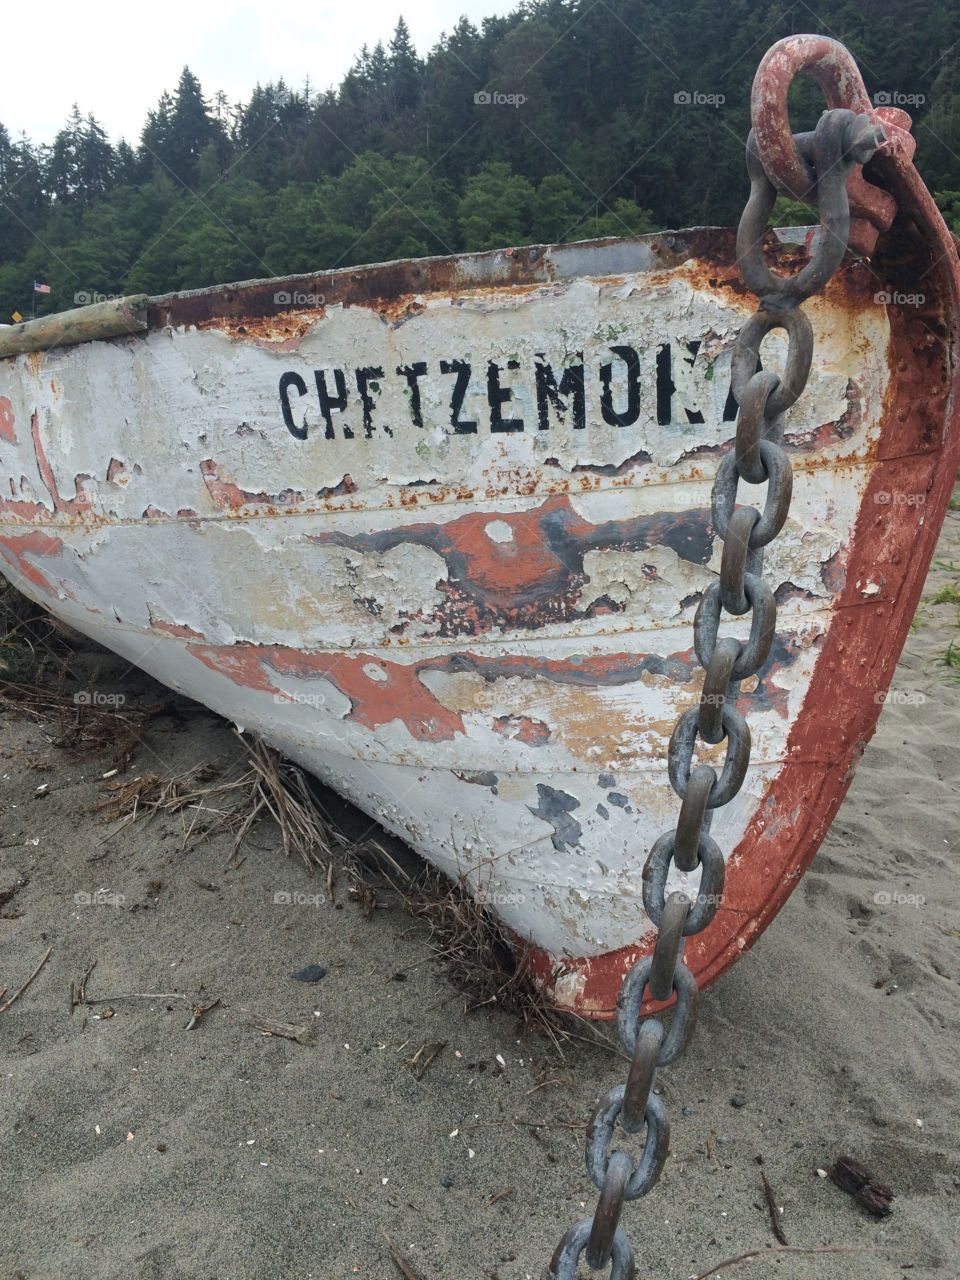 A row boat beached on the shore 